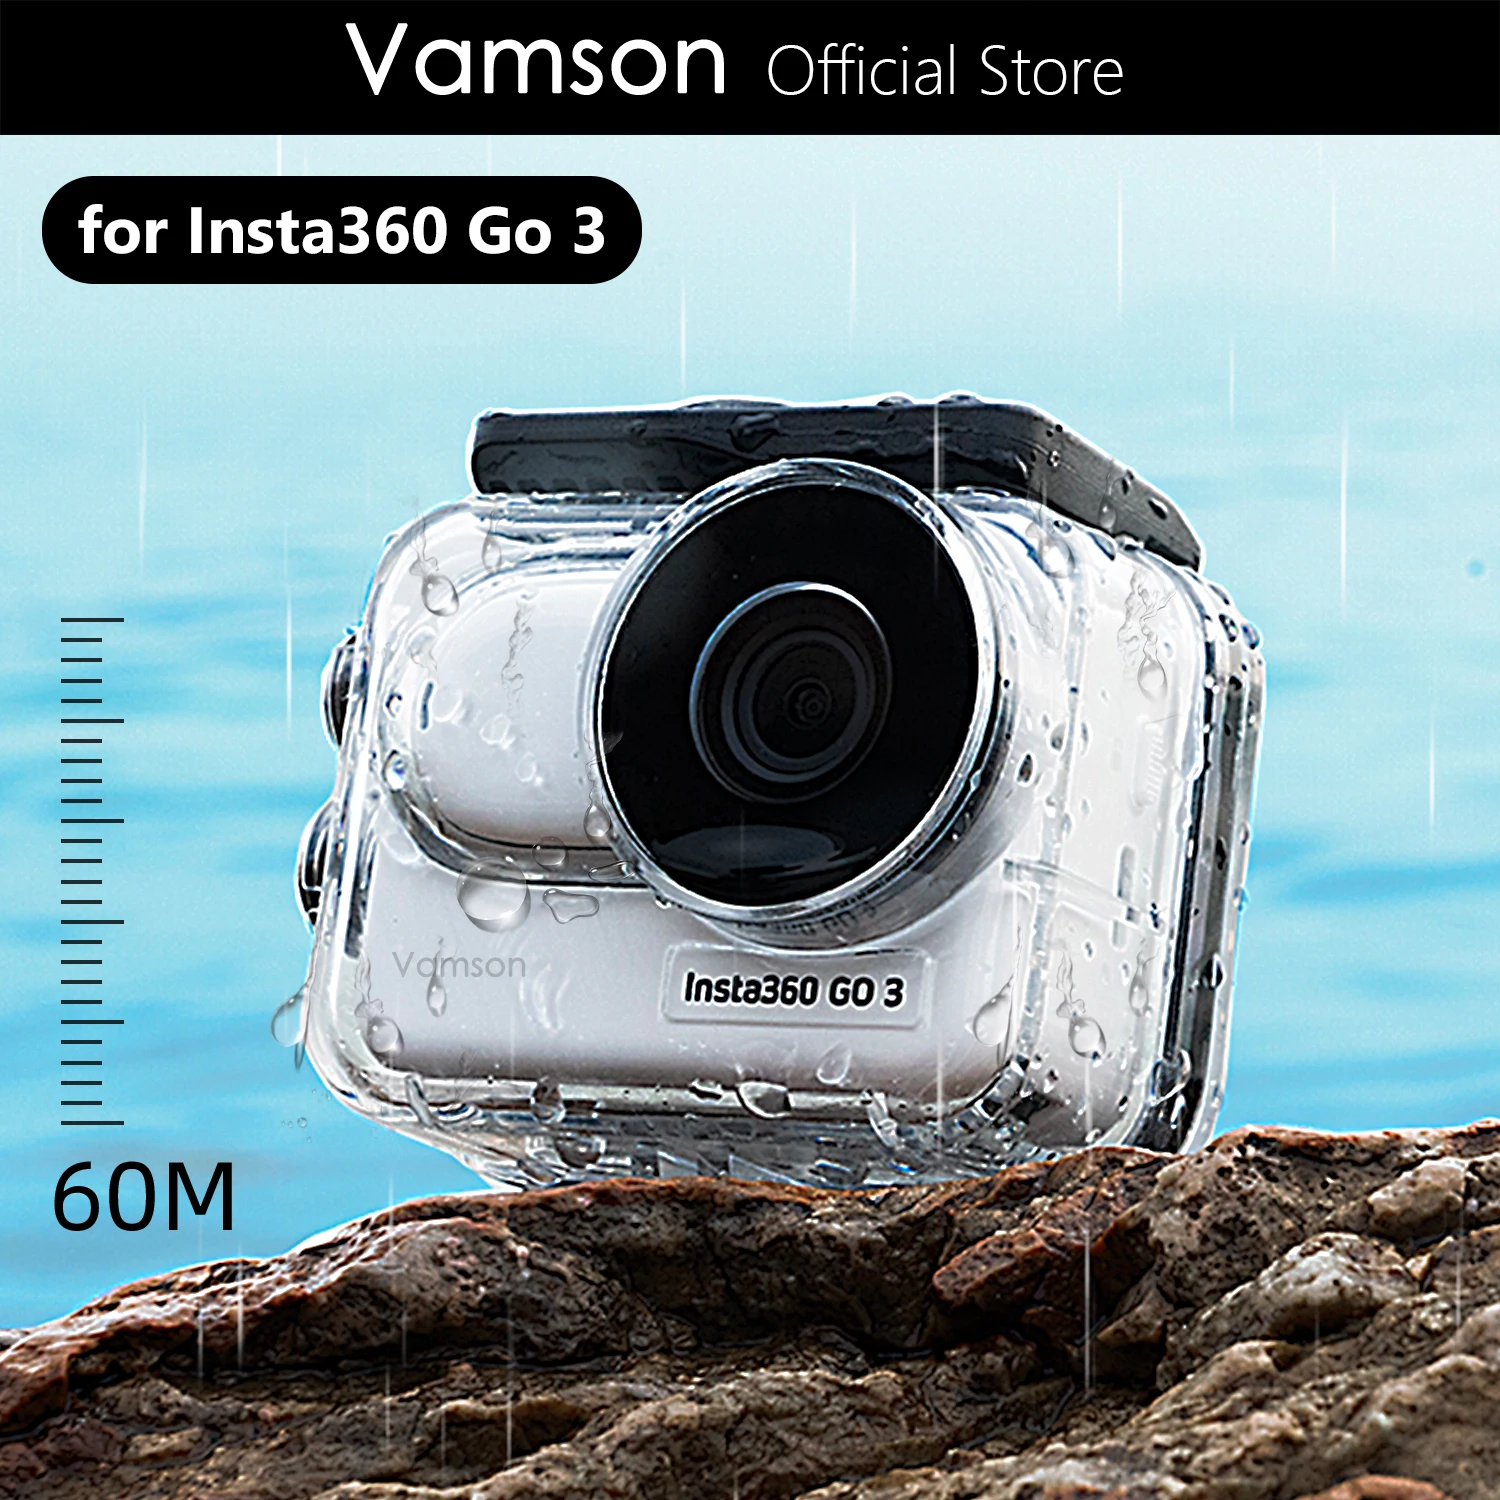 Vamson for Insta360 GO3 Case Waterproof 60M Housing Diving Protective for Insta360 GO 3 Camera Underwater Cover Accessories